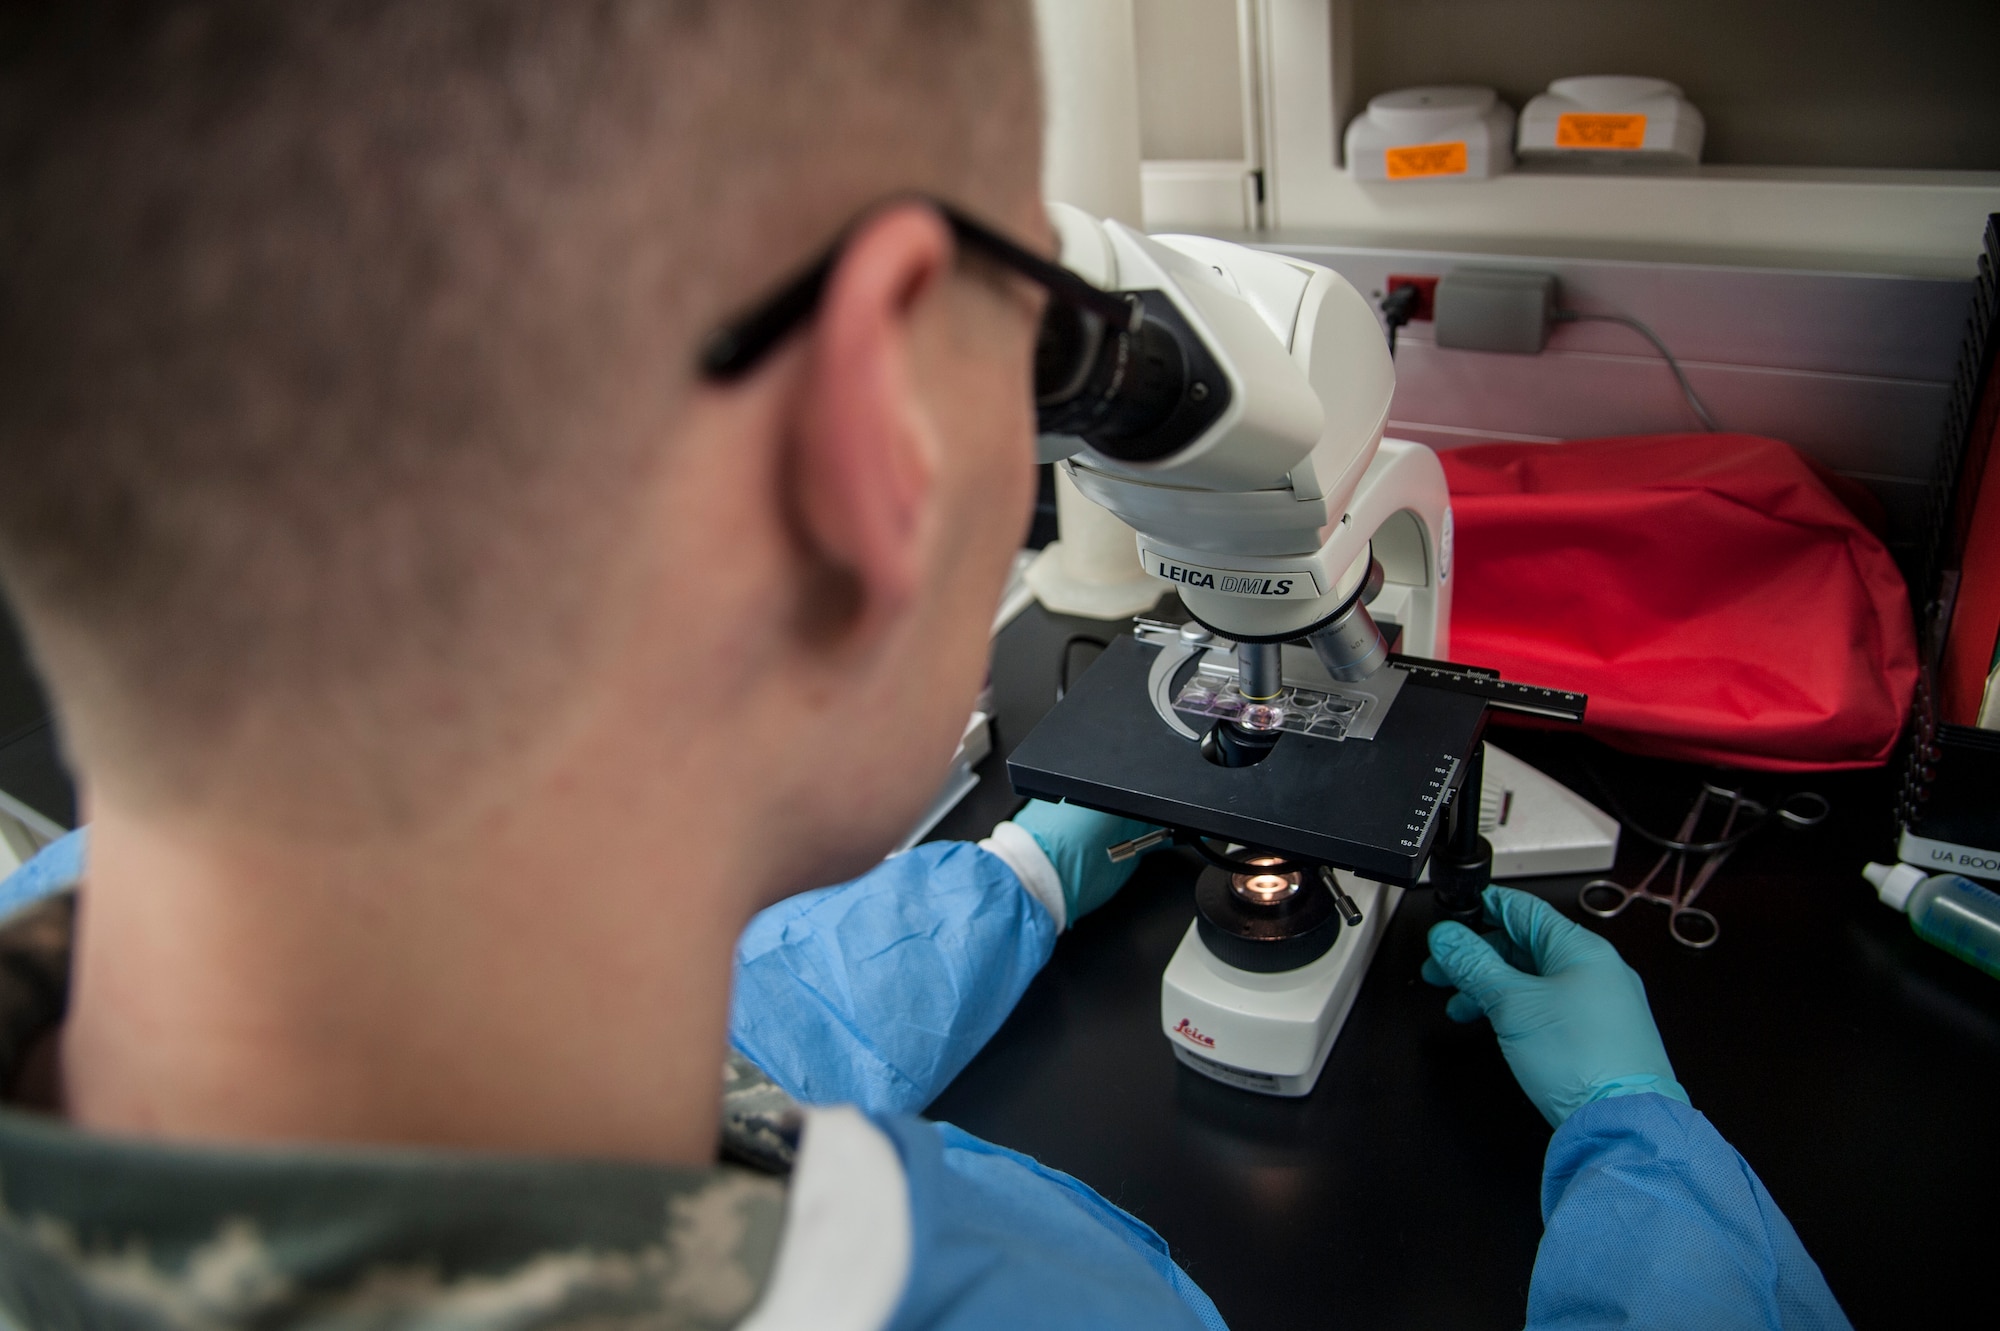 Senior Airman David Gehring, 92nd Medical Support Squadron medical laboratory technician, examines a blood slide Dec. 1, 2015, Fairchild Air Force Base, Wash. The average turnaround time for test results is less than two hours with the majority of tests taking between 30 minutes to an hour. (U.S. Air Force photo/Airman 1st Class Sean Campbell)